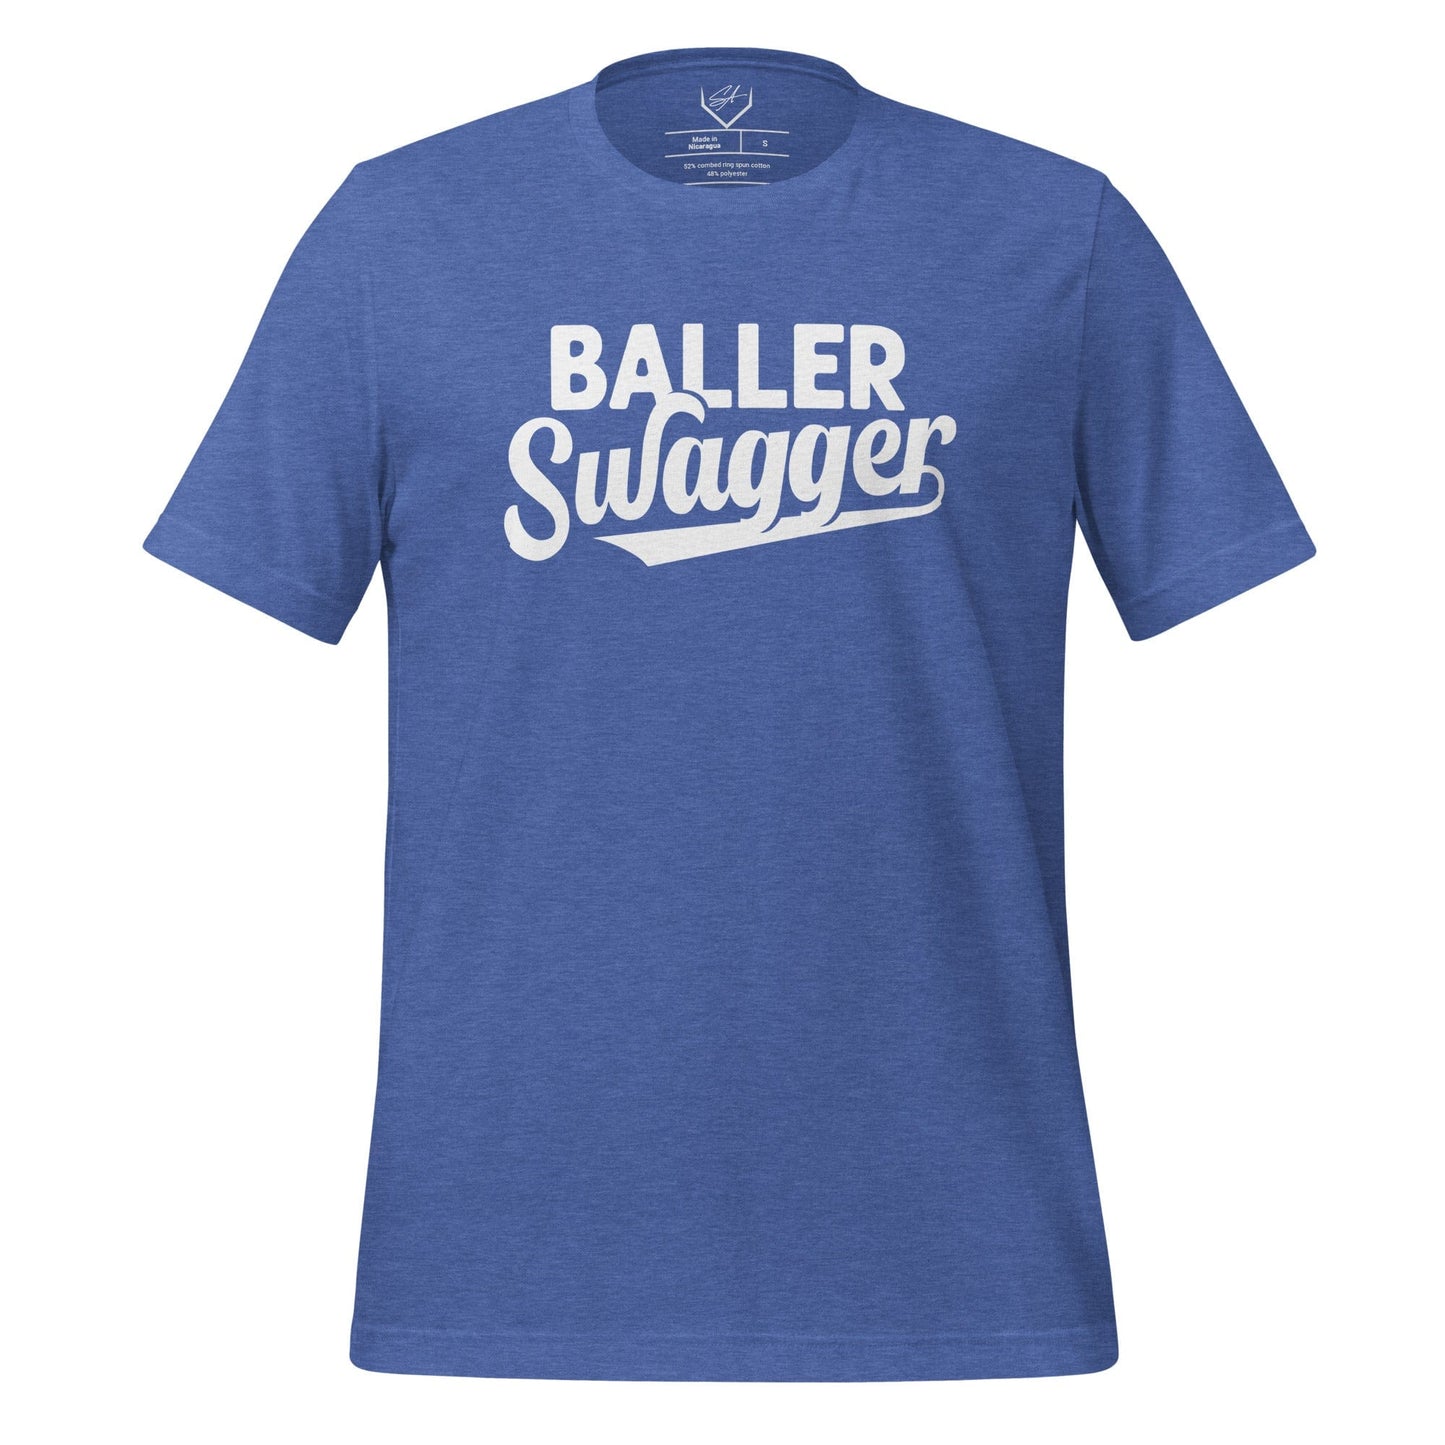 Baller Swagger - Adult Tee